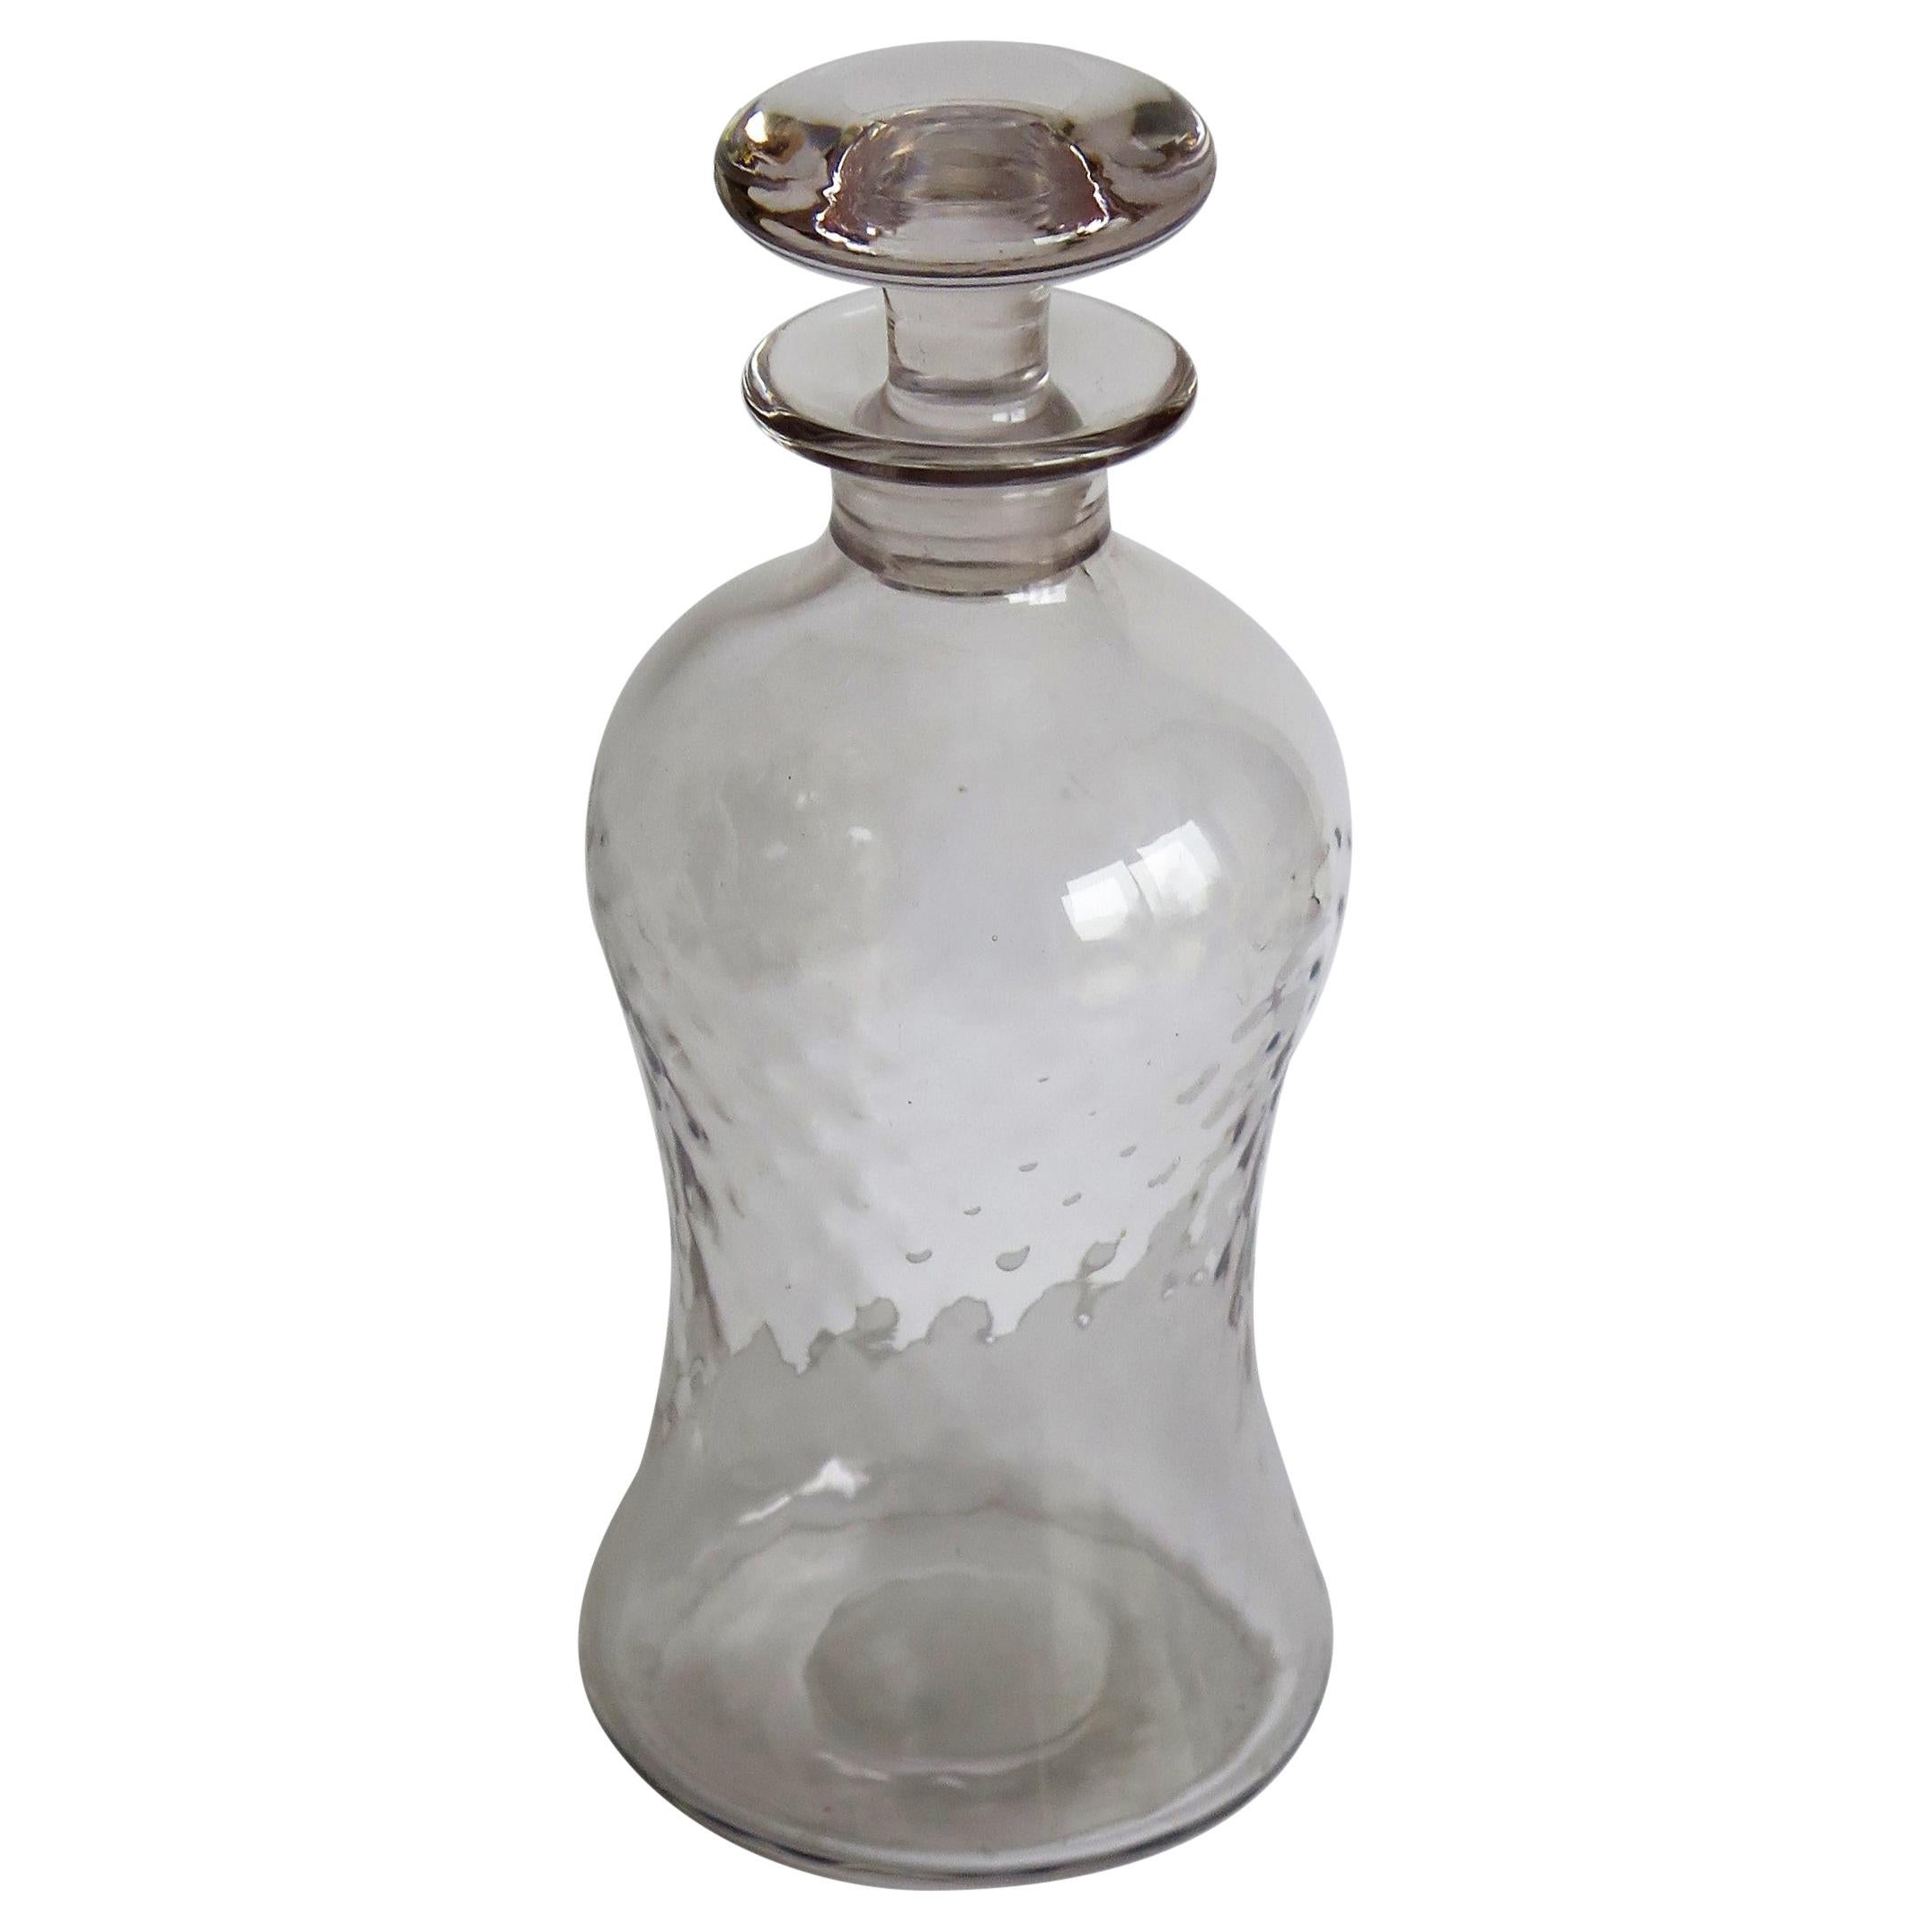 Edwardian Blown Glass Decanter Dimple Moulded with Mushroom Stopper, circa 1900 For Sale